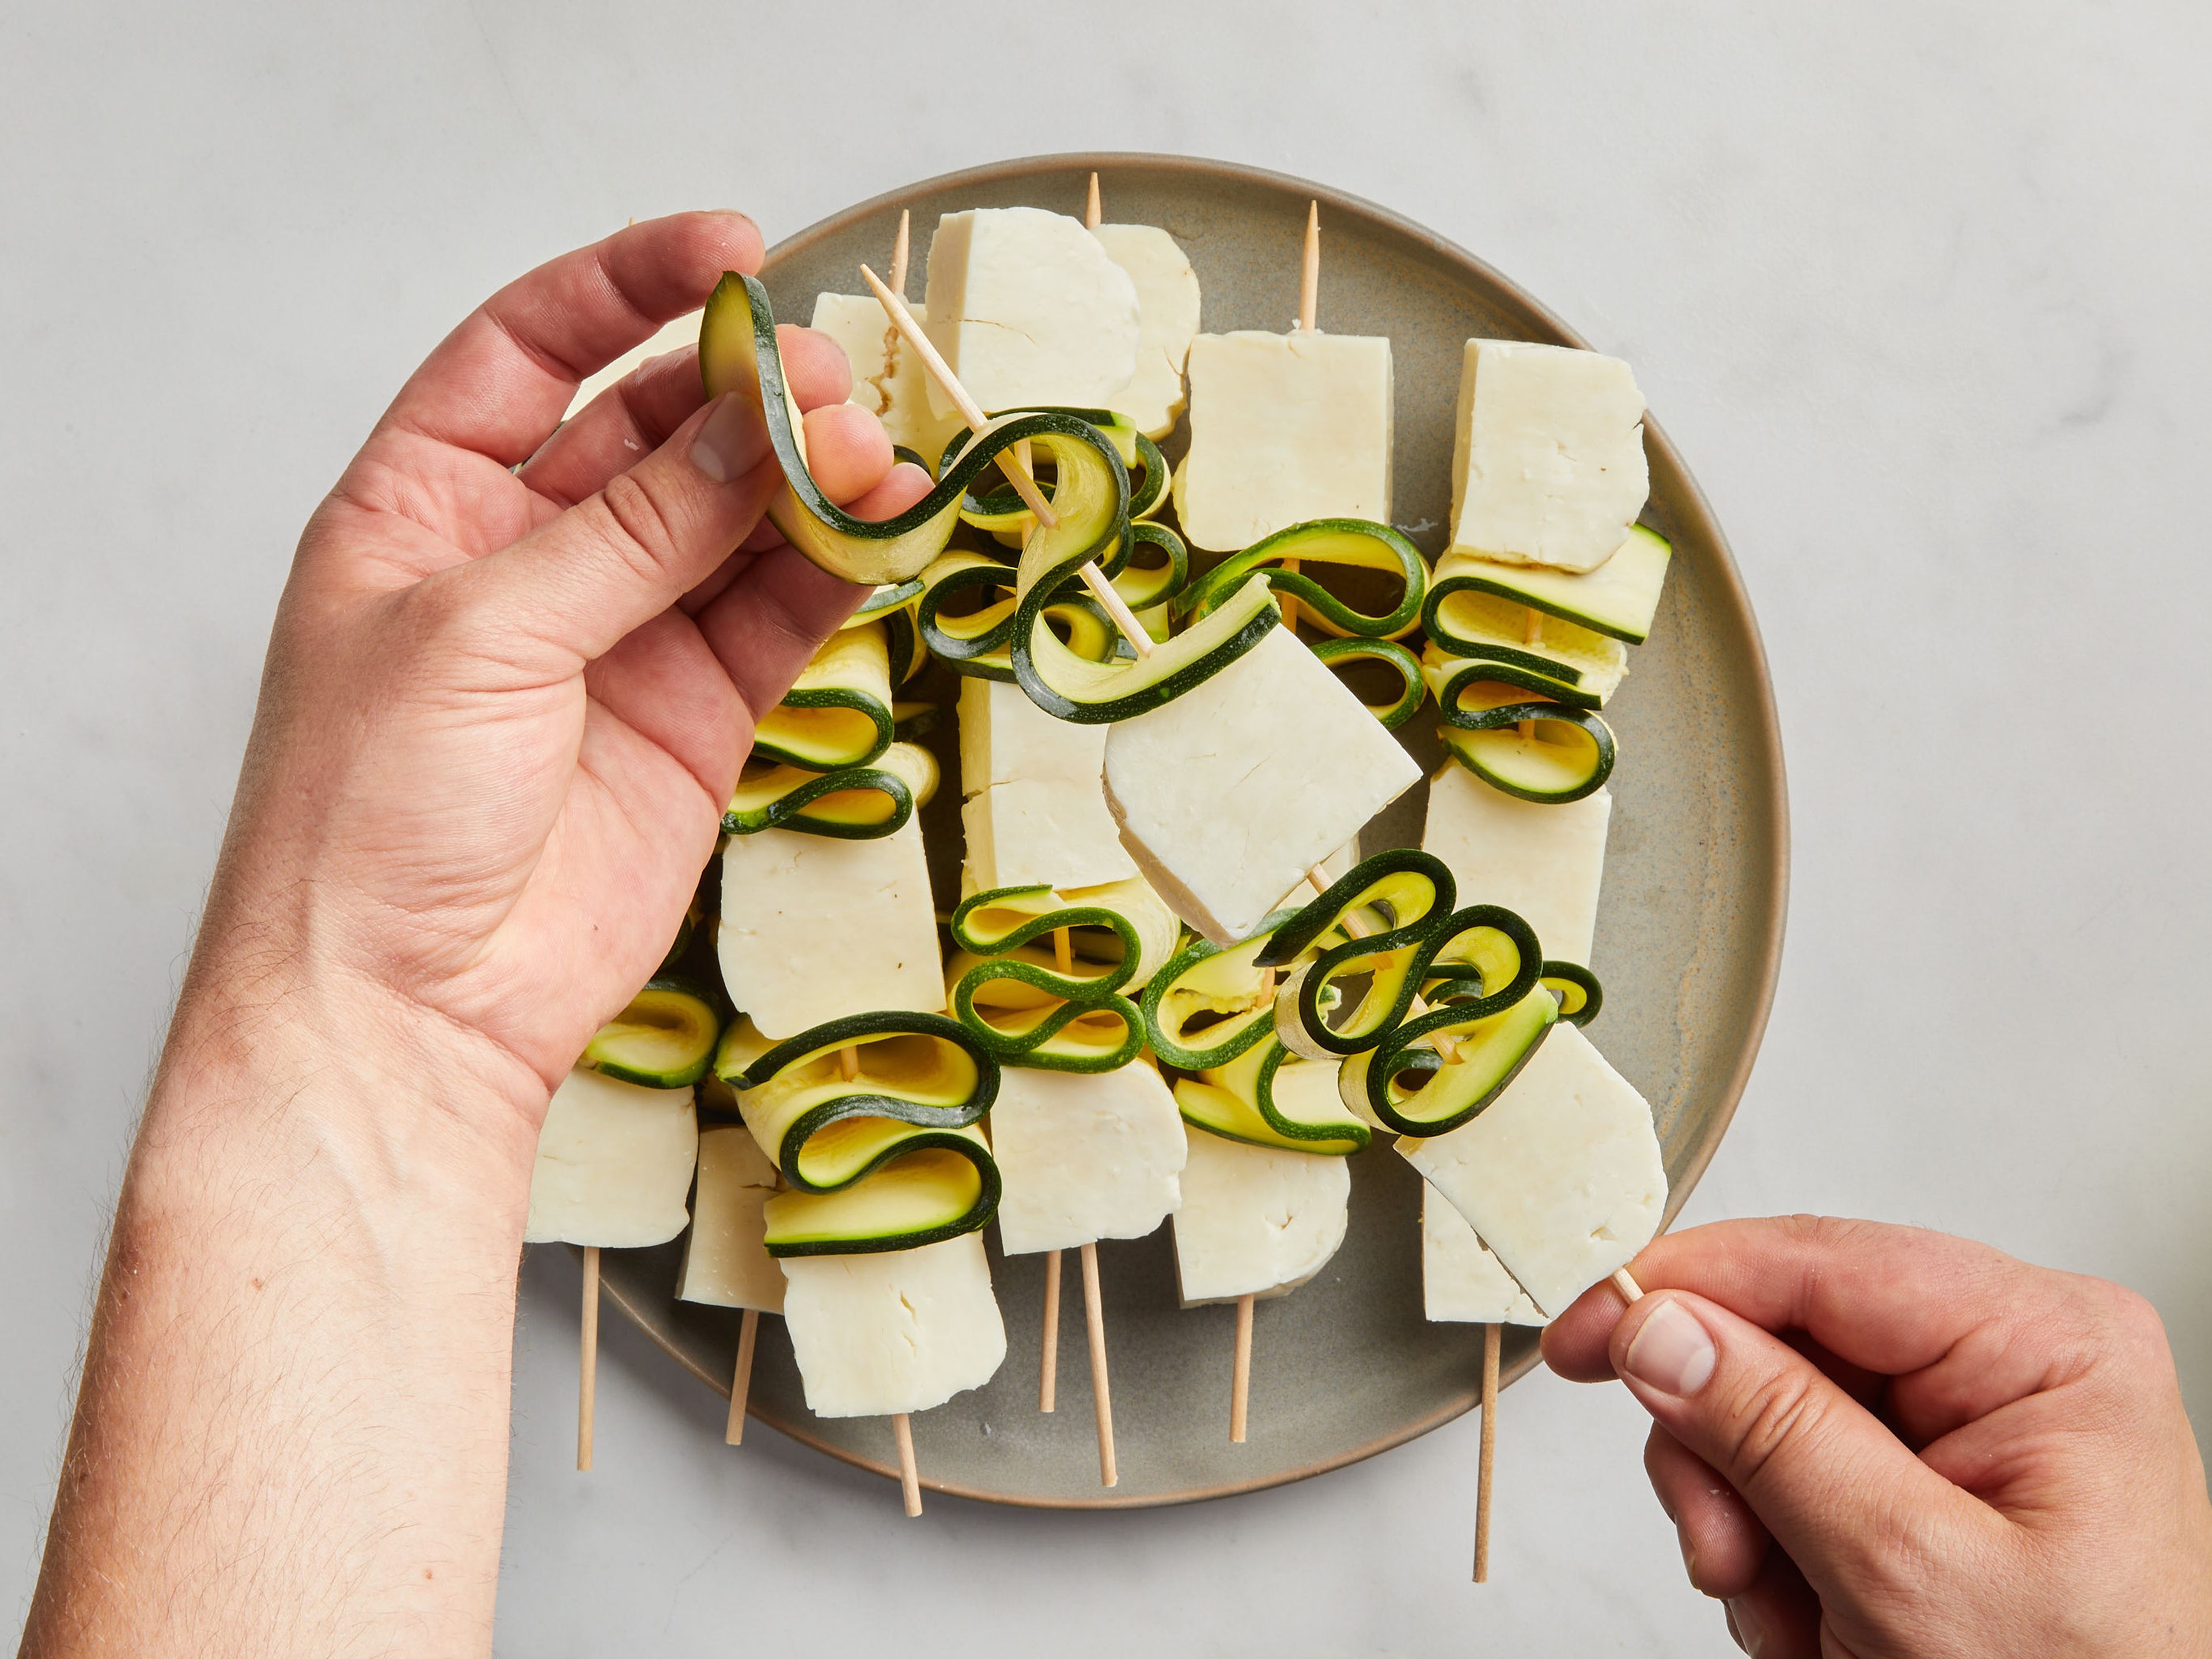 Now assemble the skewers. To do this, start and end each skewer with a halloumi cube and alternate the zucchini slices in an S-shape between them. There should be 3 halloumi cubes per skewer. Brush with olive oil and season with salt and pepper.